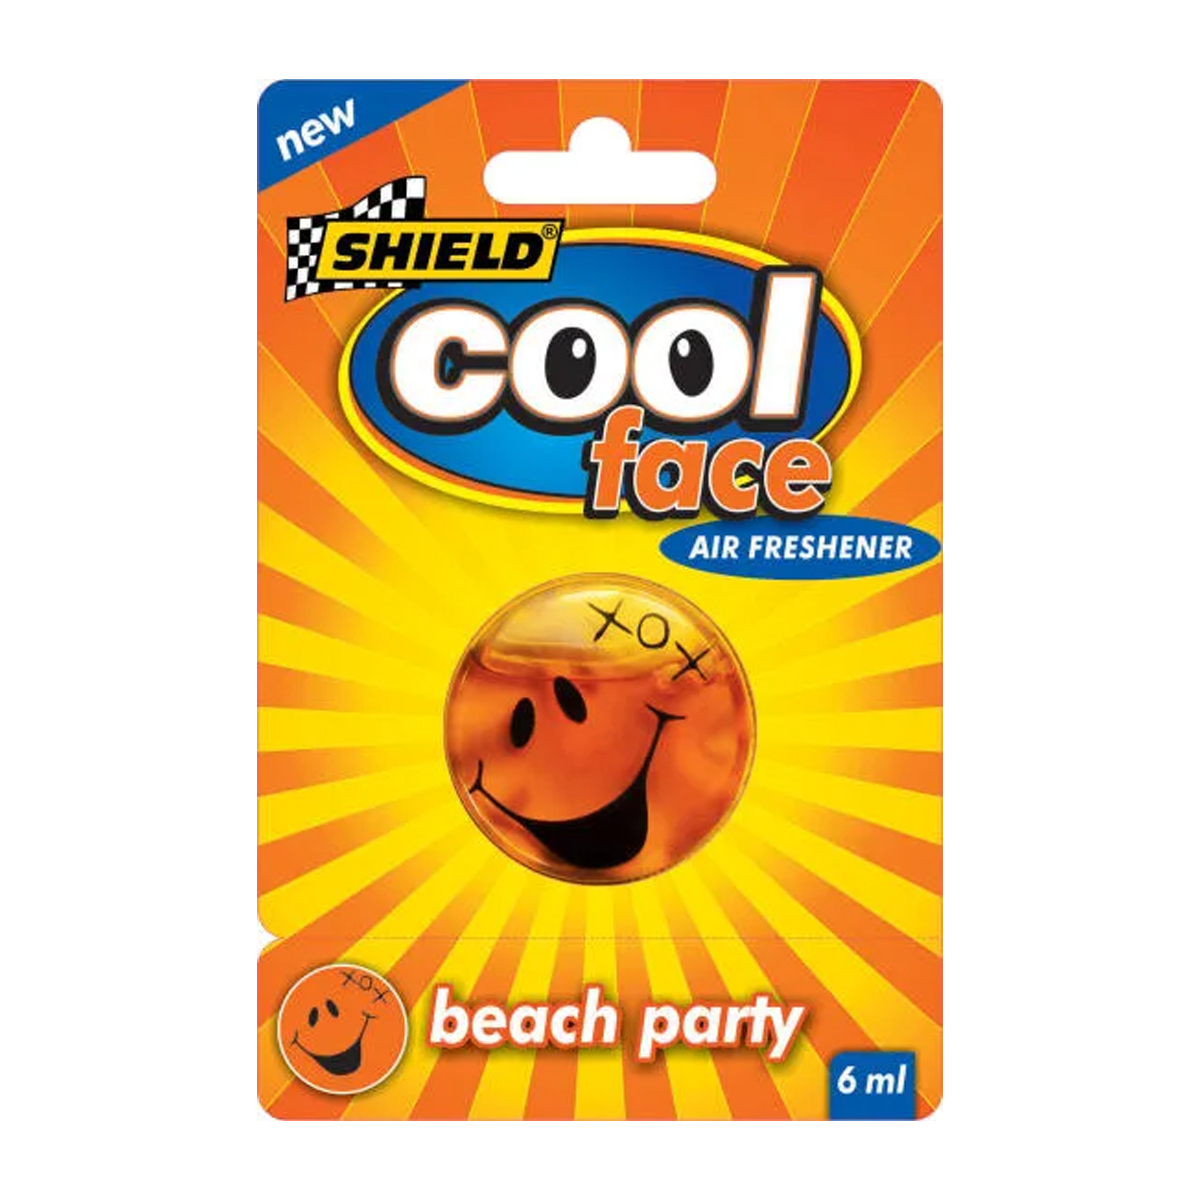 Shield Cool Face Freshener Beach Party 6Ml